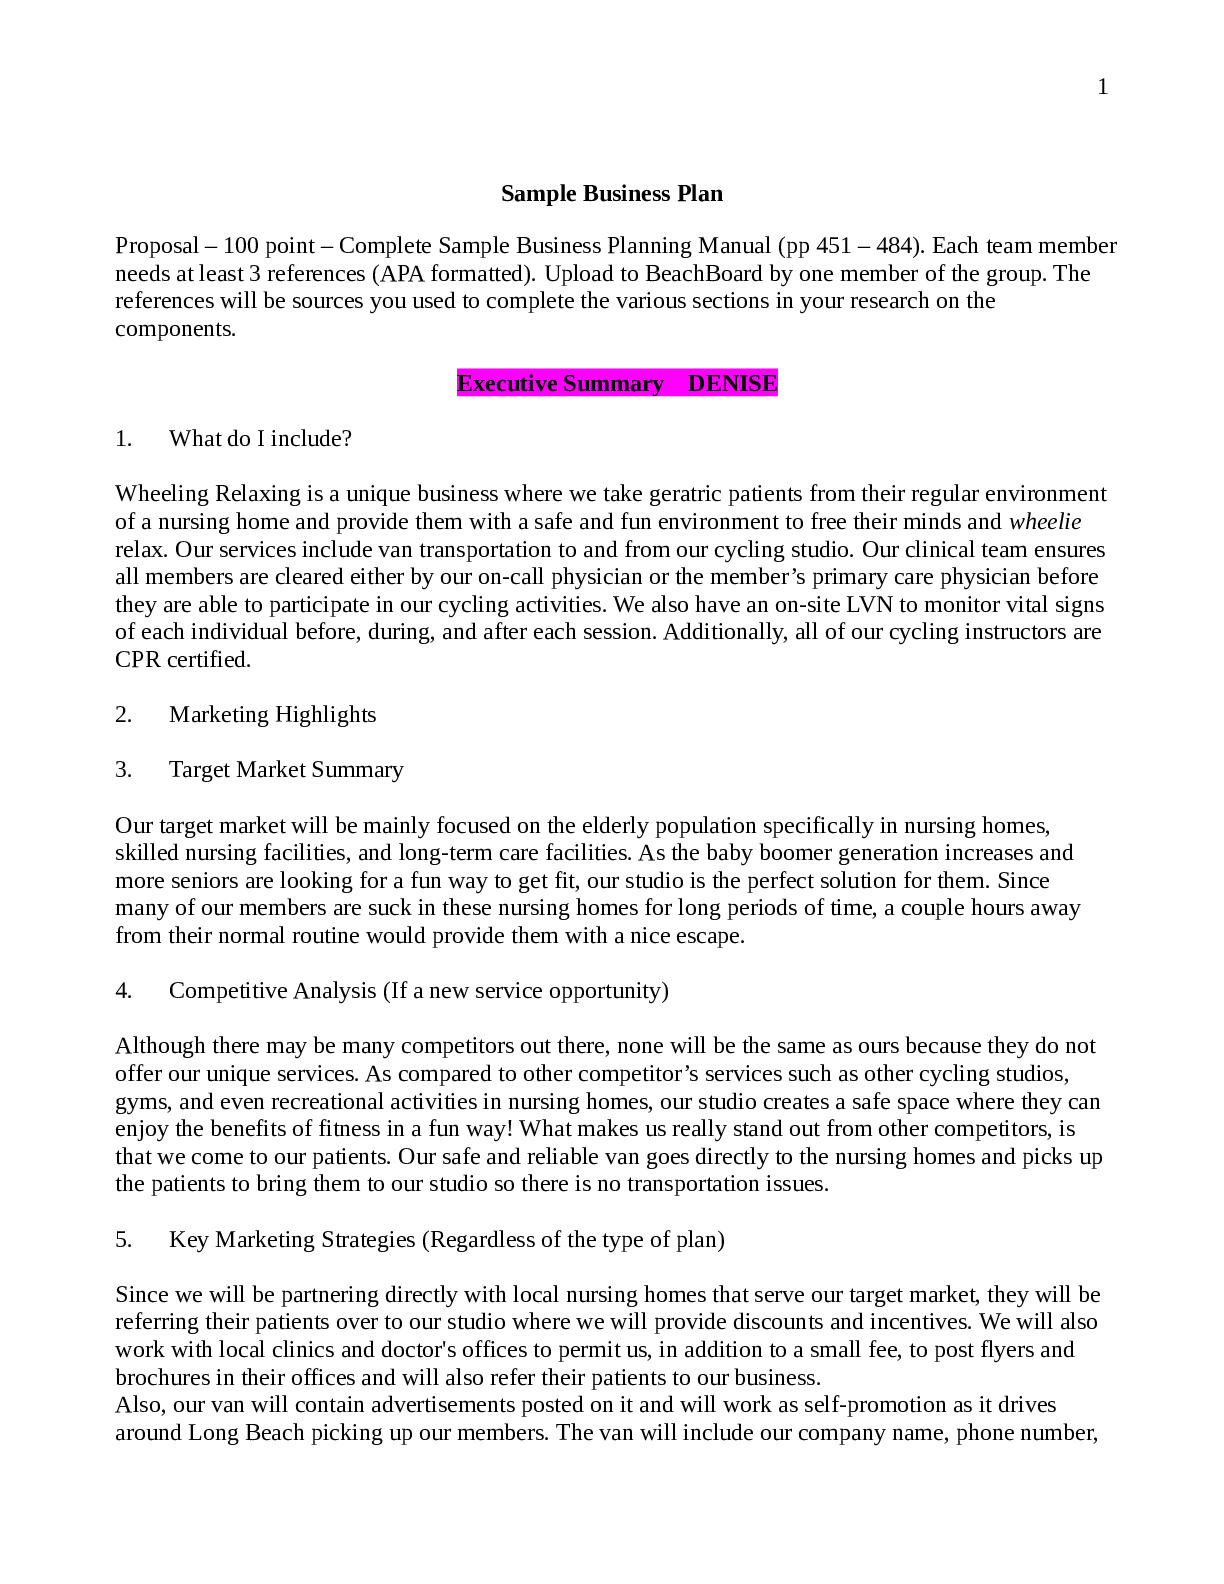 Copy_of_Sample_Business_Plan__HCA_353_Group_Project.docx (1)